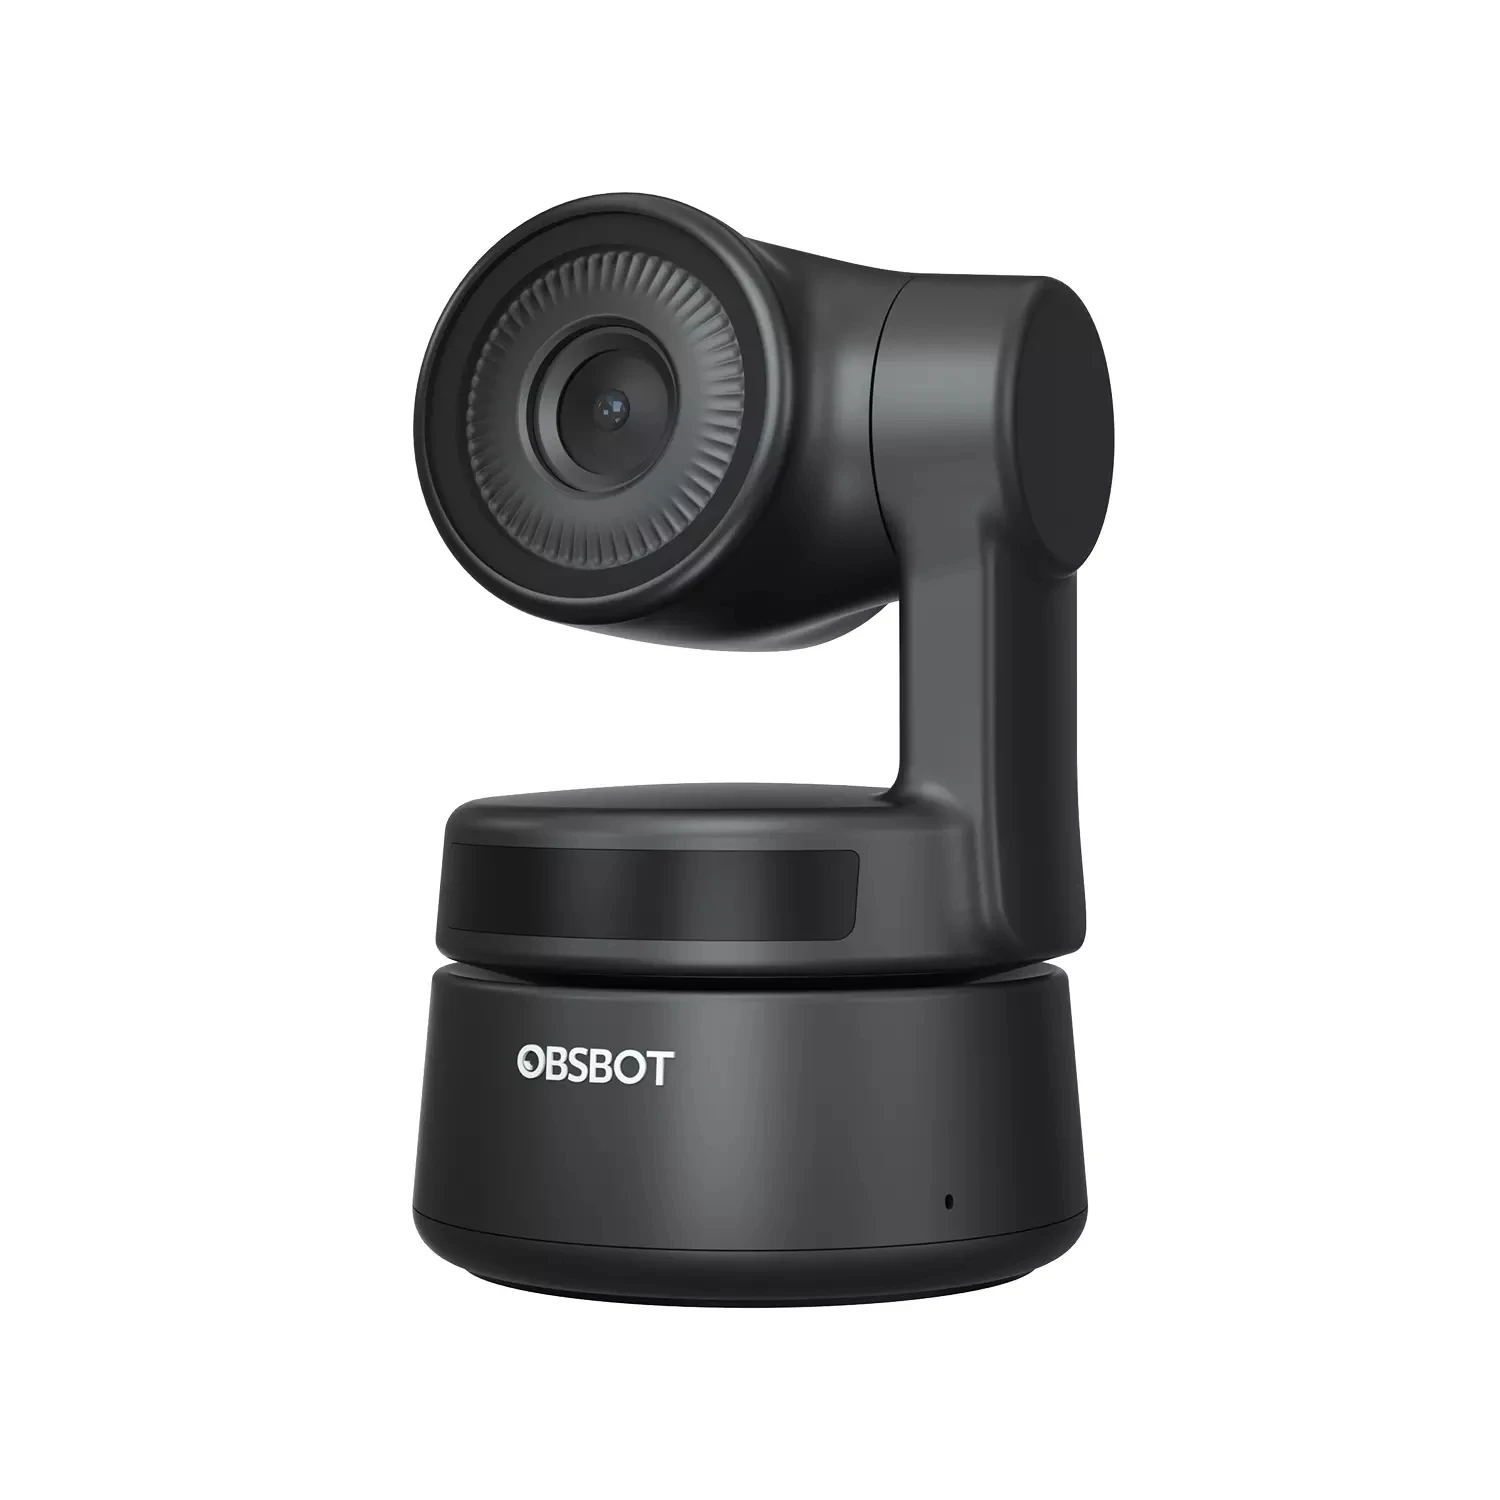 

Tiny AI-Powered PTZ Webcam 1080p Full HD 1080p Video Conferencing, Recording and Streaming for Online Class Meeting Live